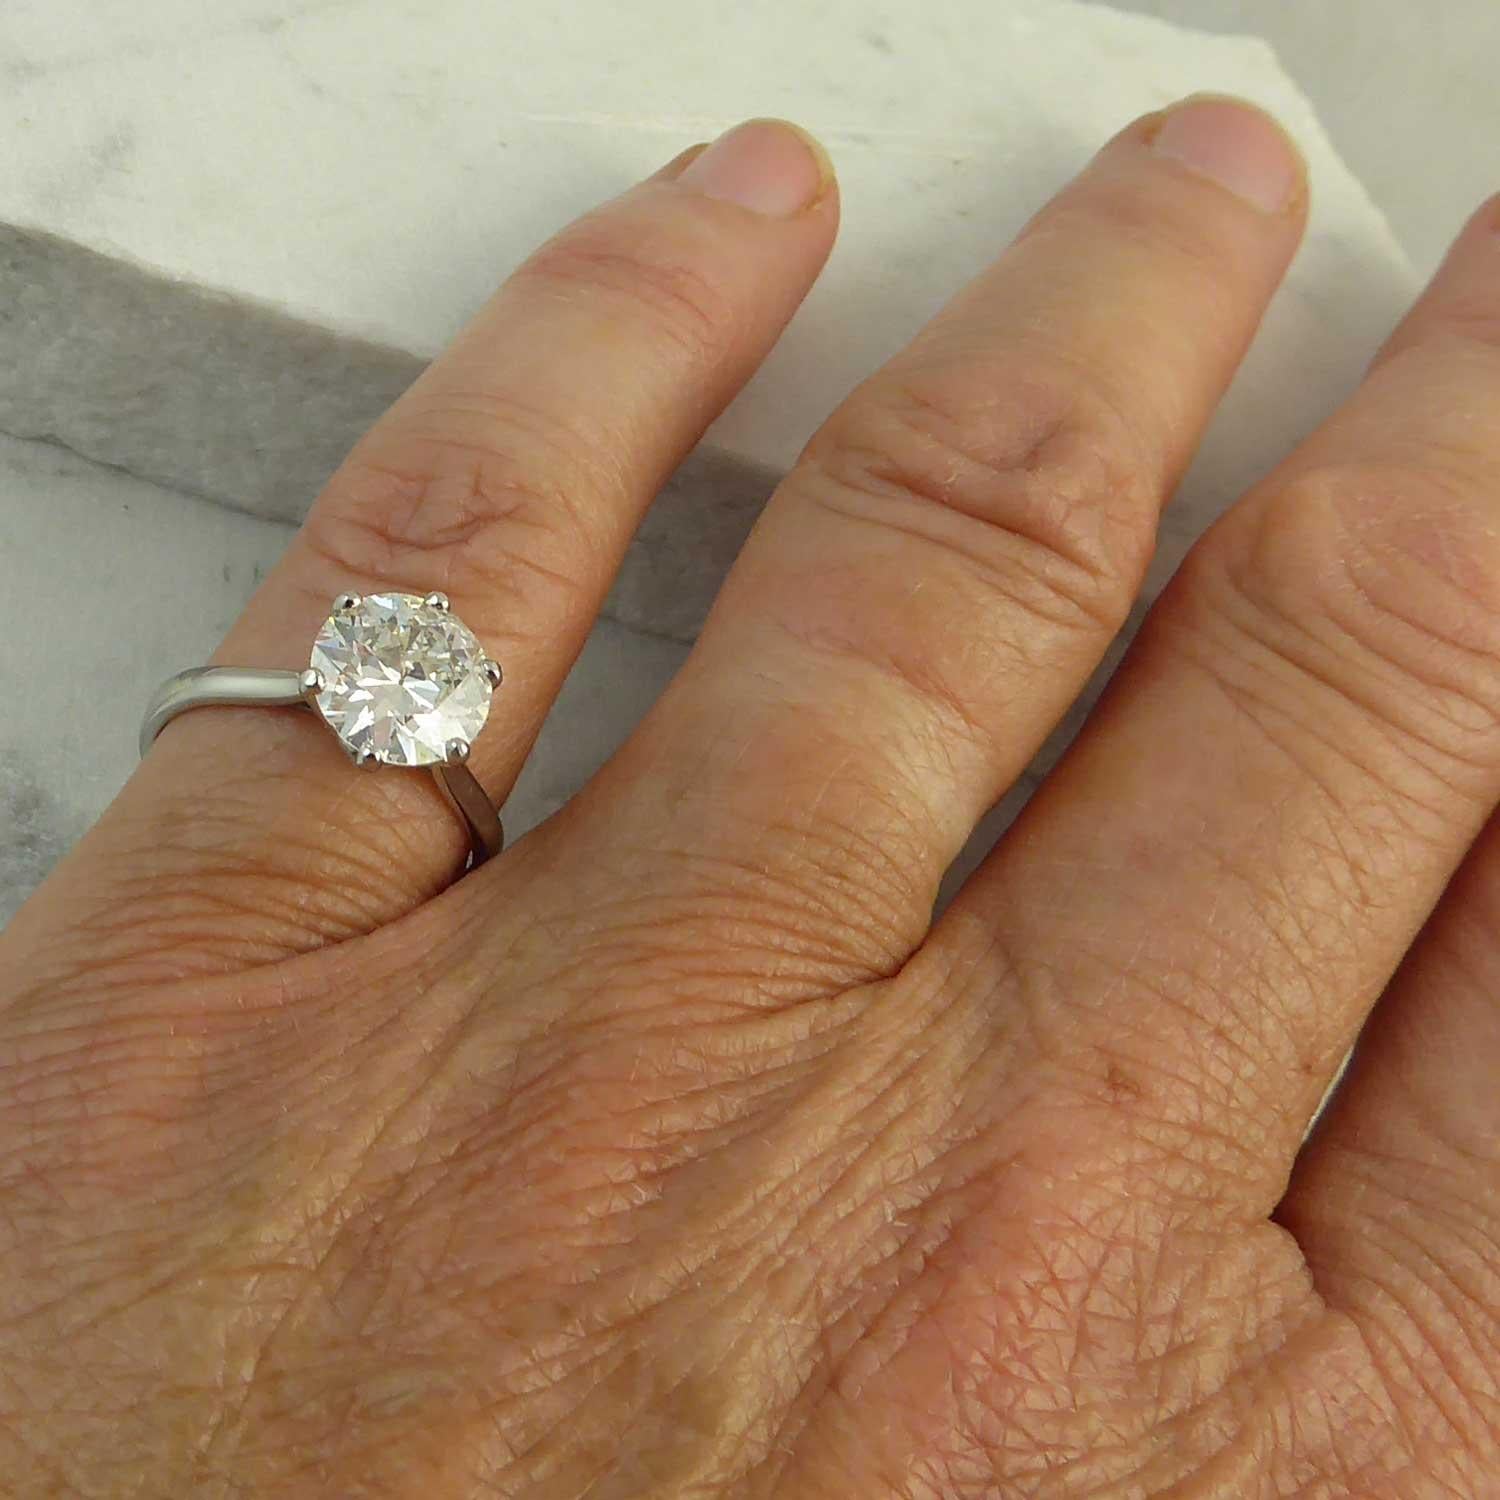 2.02 Carat Early Brilliant Cut Diamond Traditionally Set in a New Platinum Mount 6